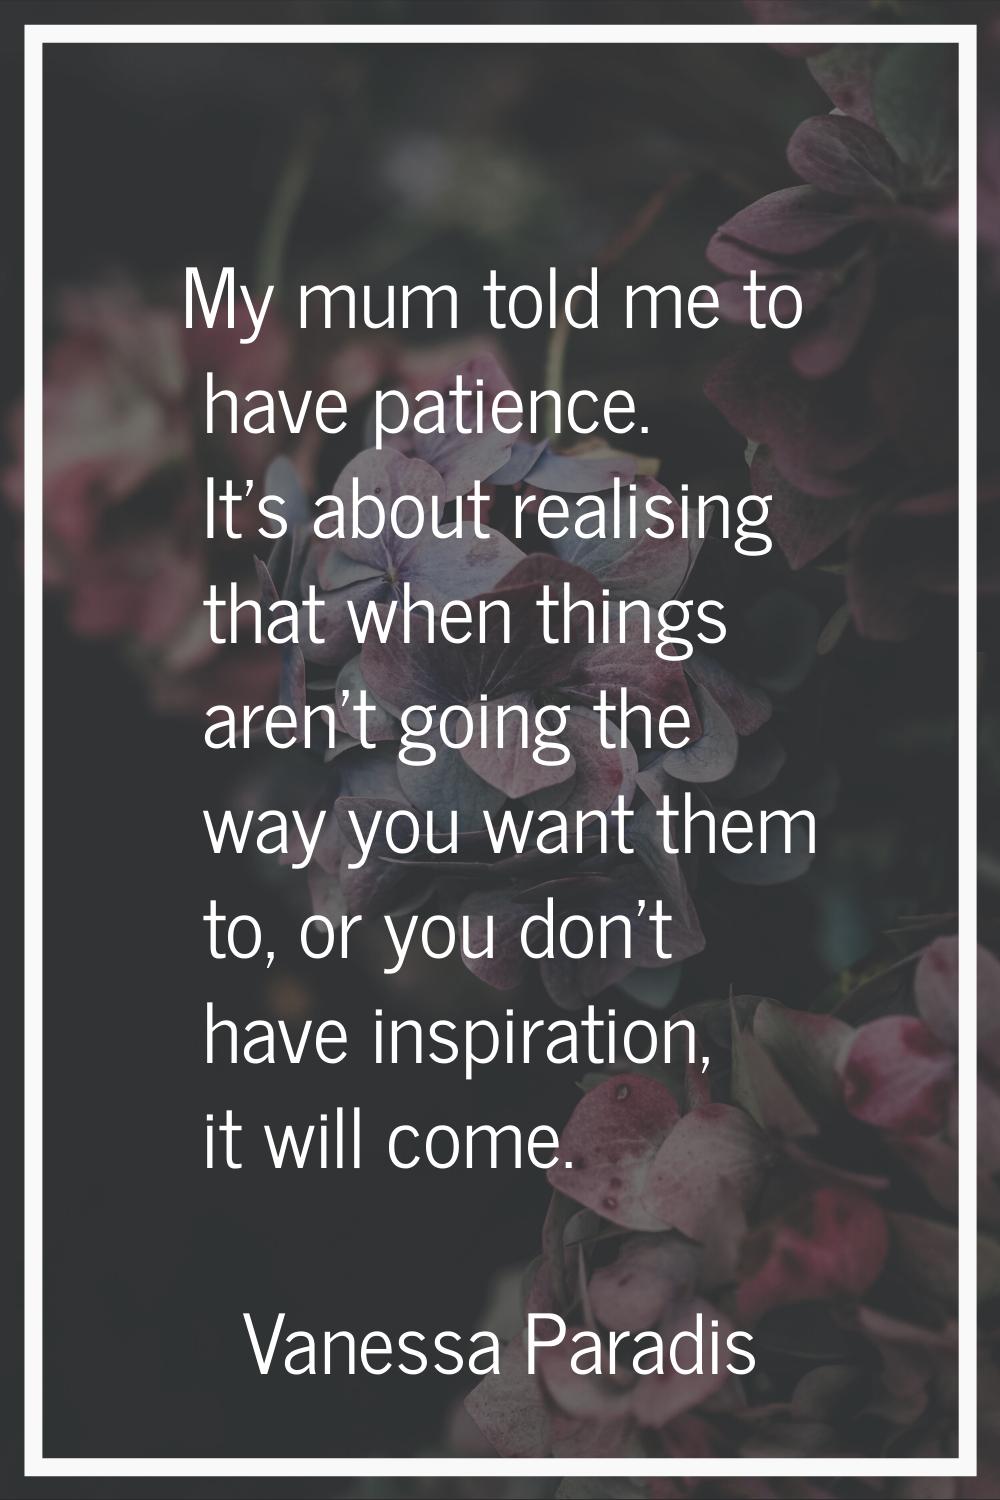 My mum told me to have patience. It's about realising that when things aren't going the way you wan